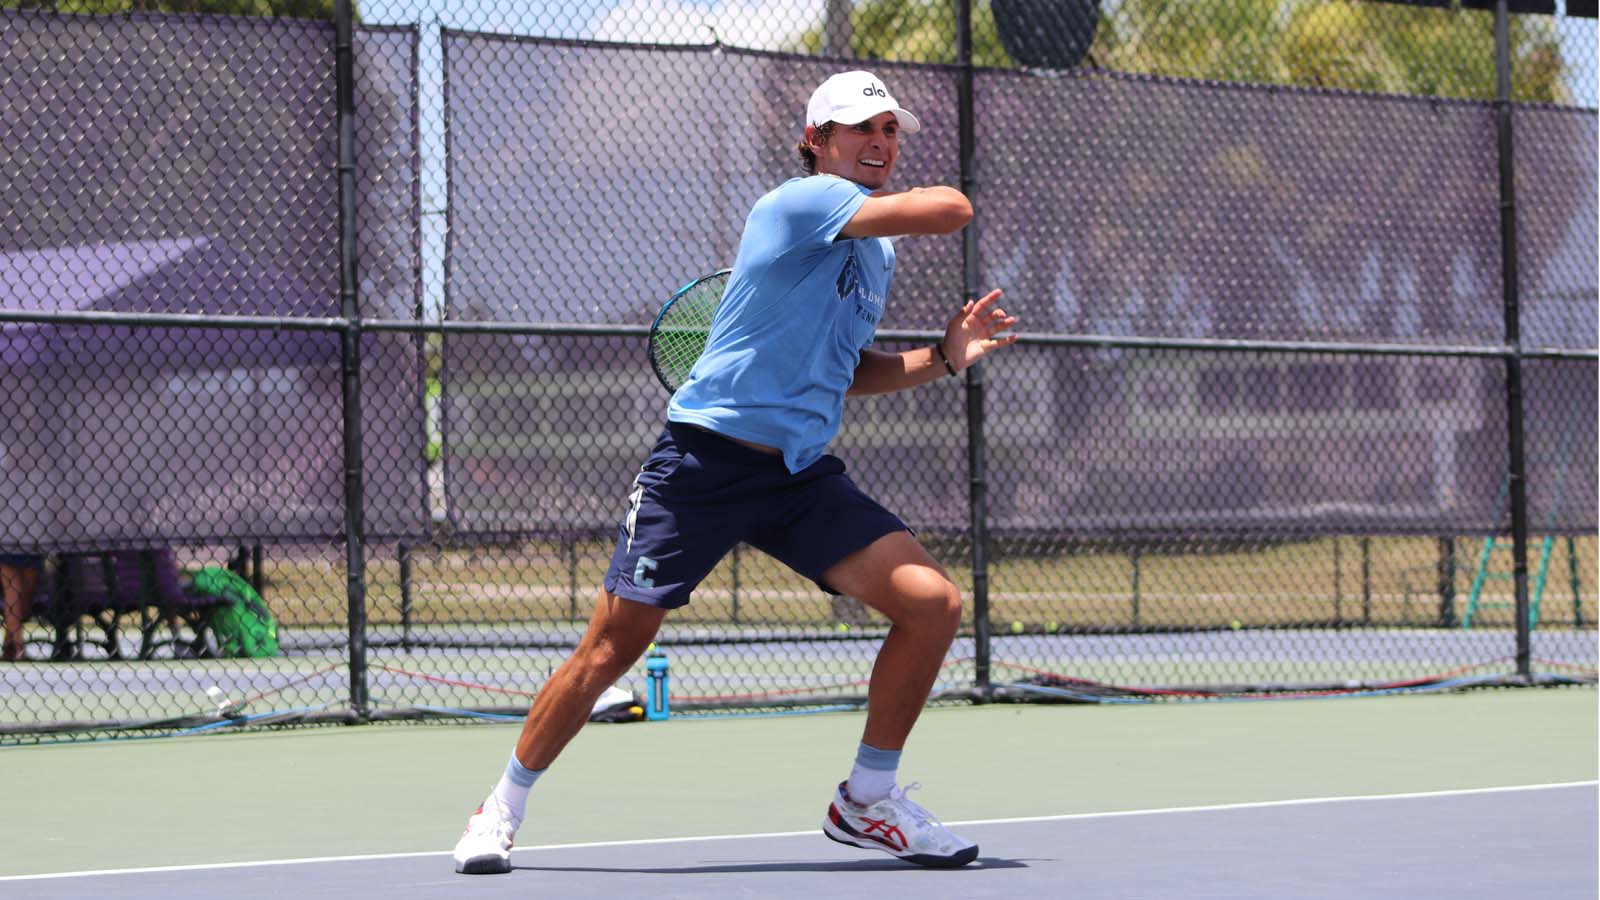 UTR Pro Tennis Tour July Roundup Events Hosted in New Cities from Jer